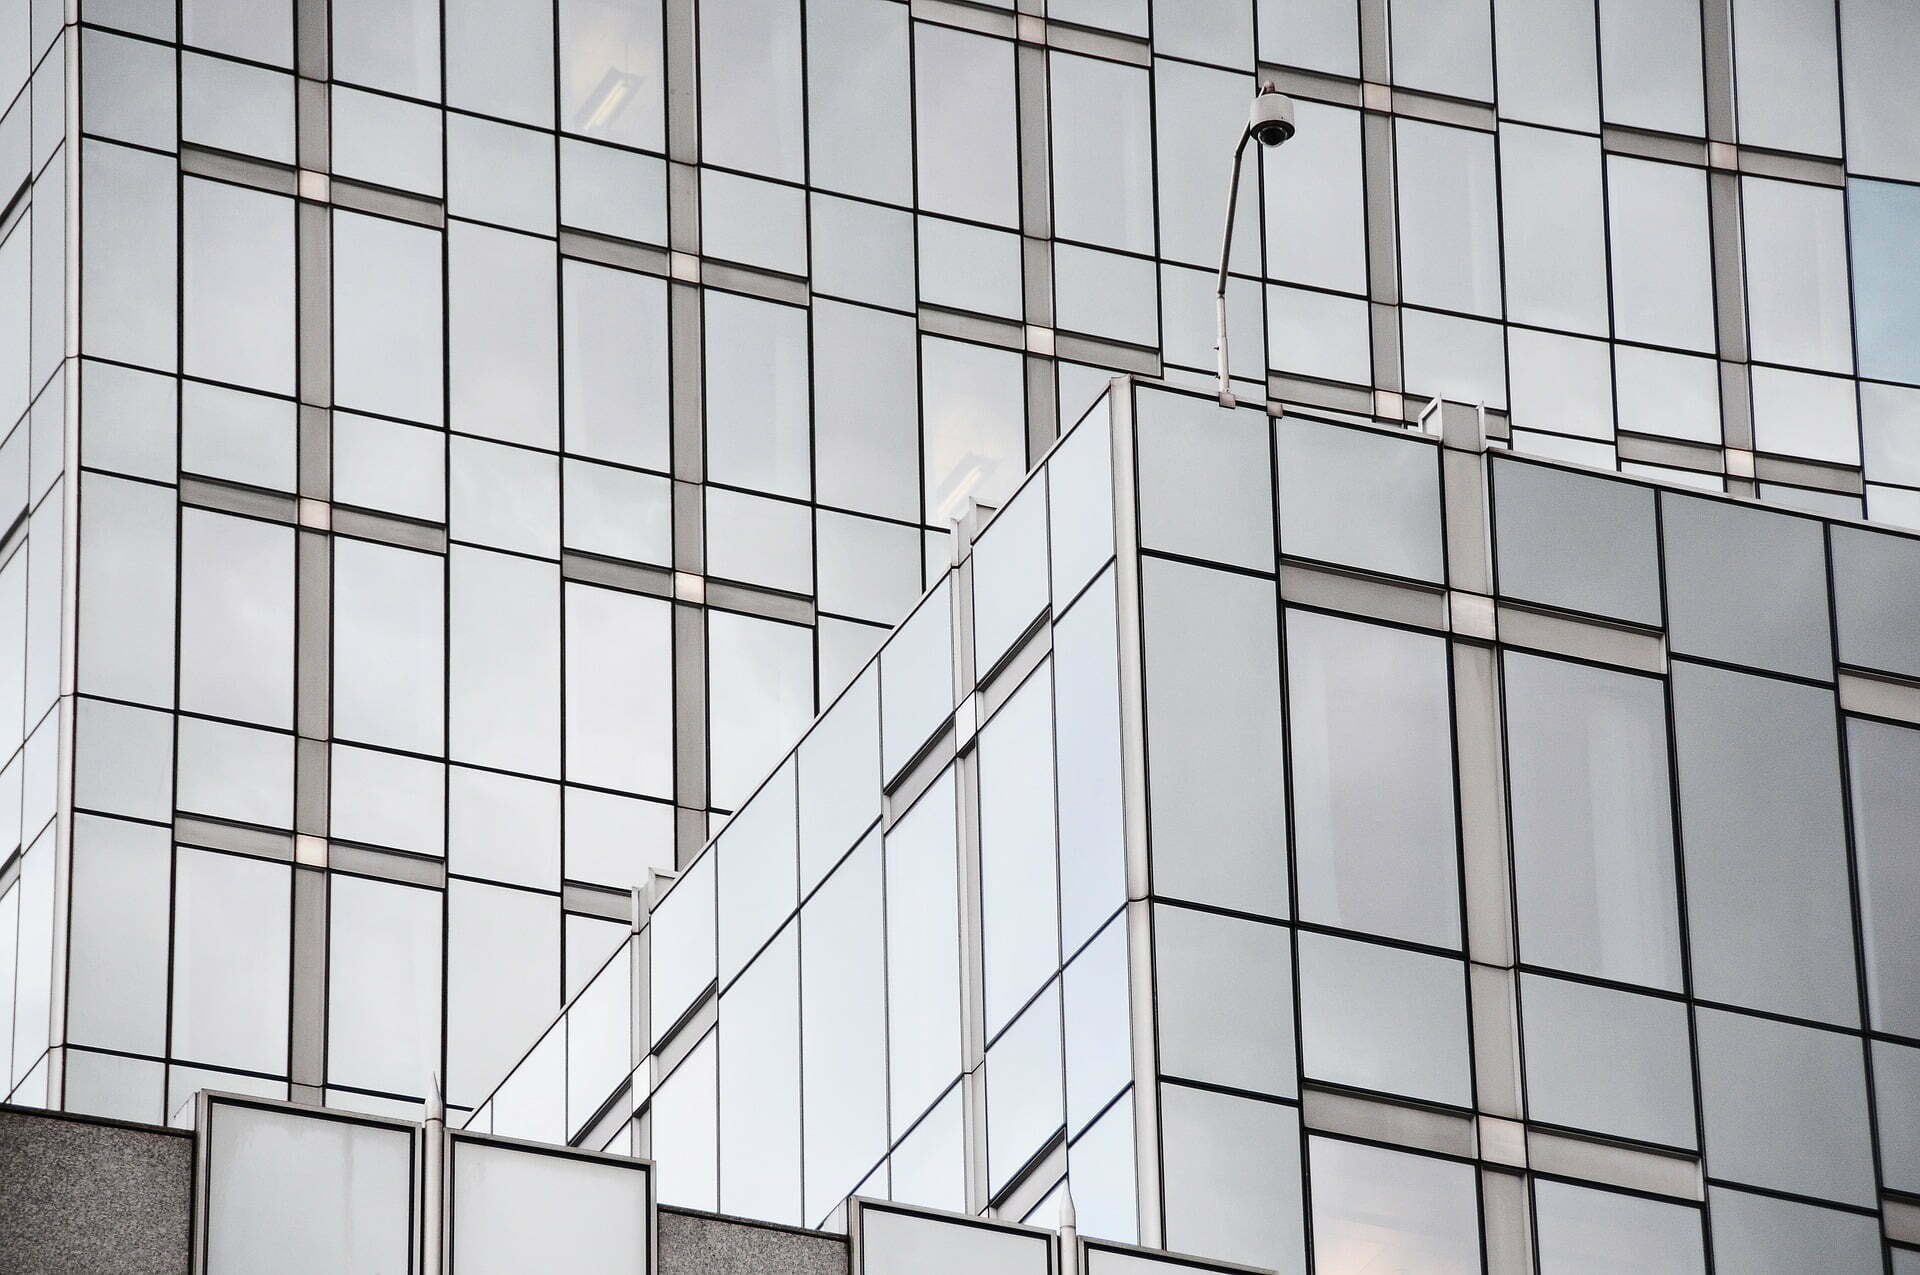 glassware g82e831bcc 1920 Brink Tower in Amsterdam is a Pillar of Sustainable Design